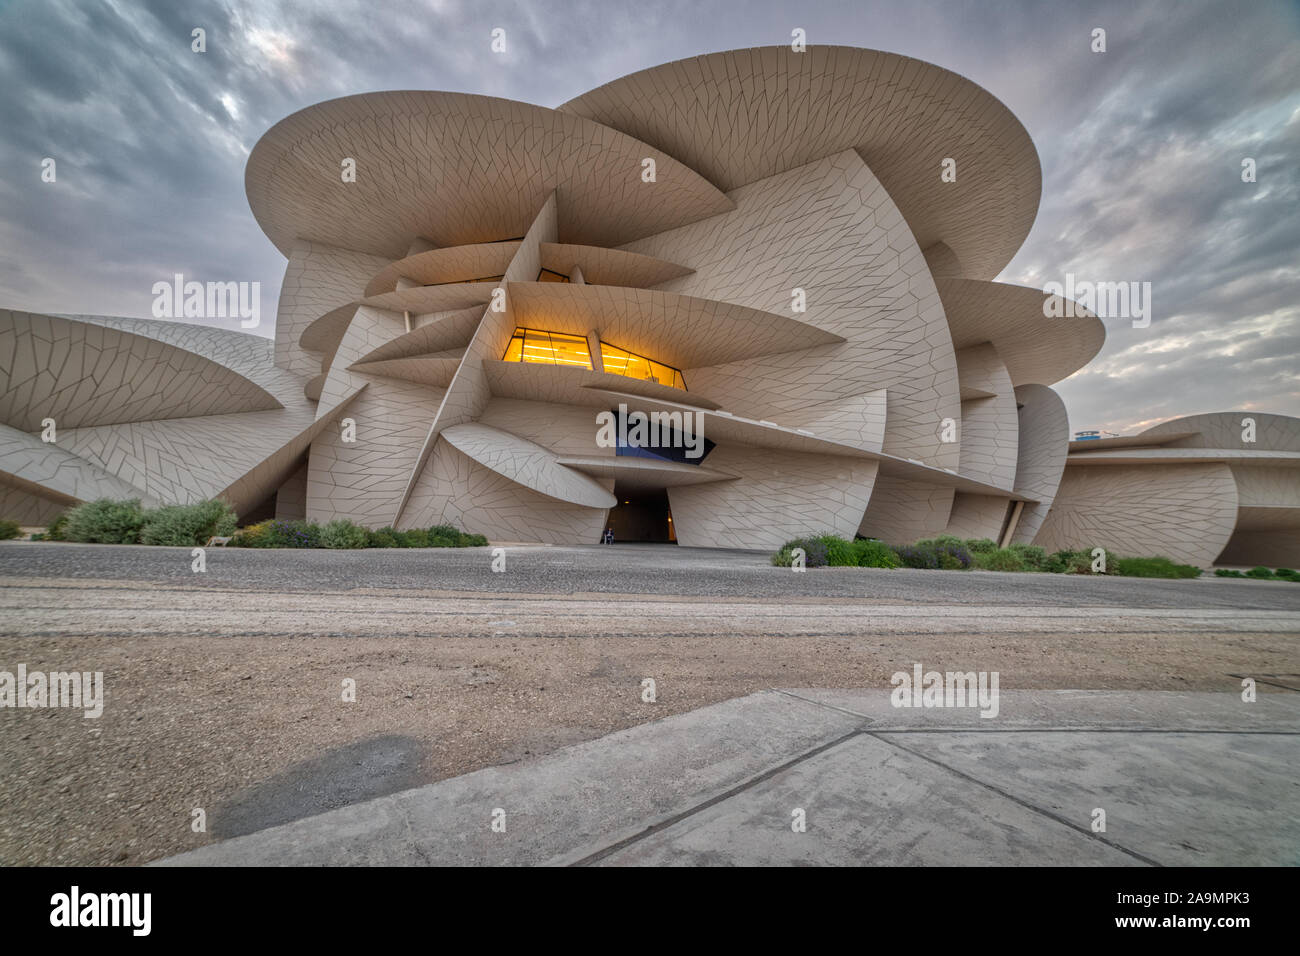 National Museum of Qatar (Desert rose) panoramic external view show the  unique architecture of museum at sunset with clouds in the sky in  background Stock Photo - Alamy